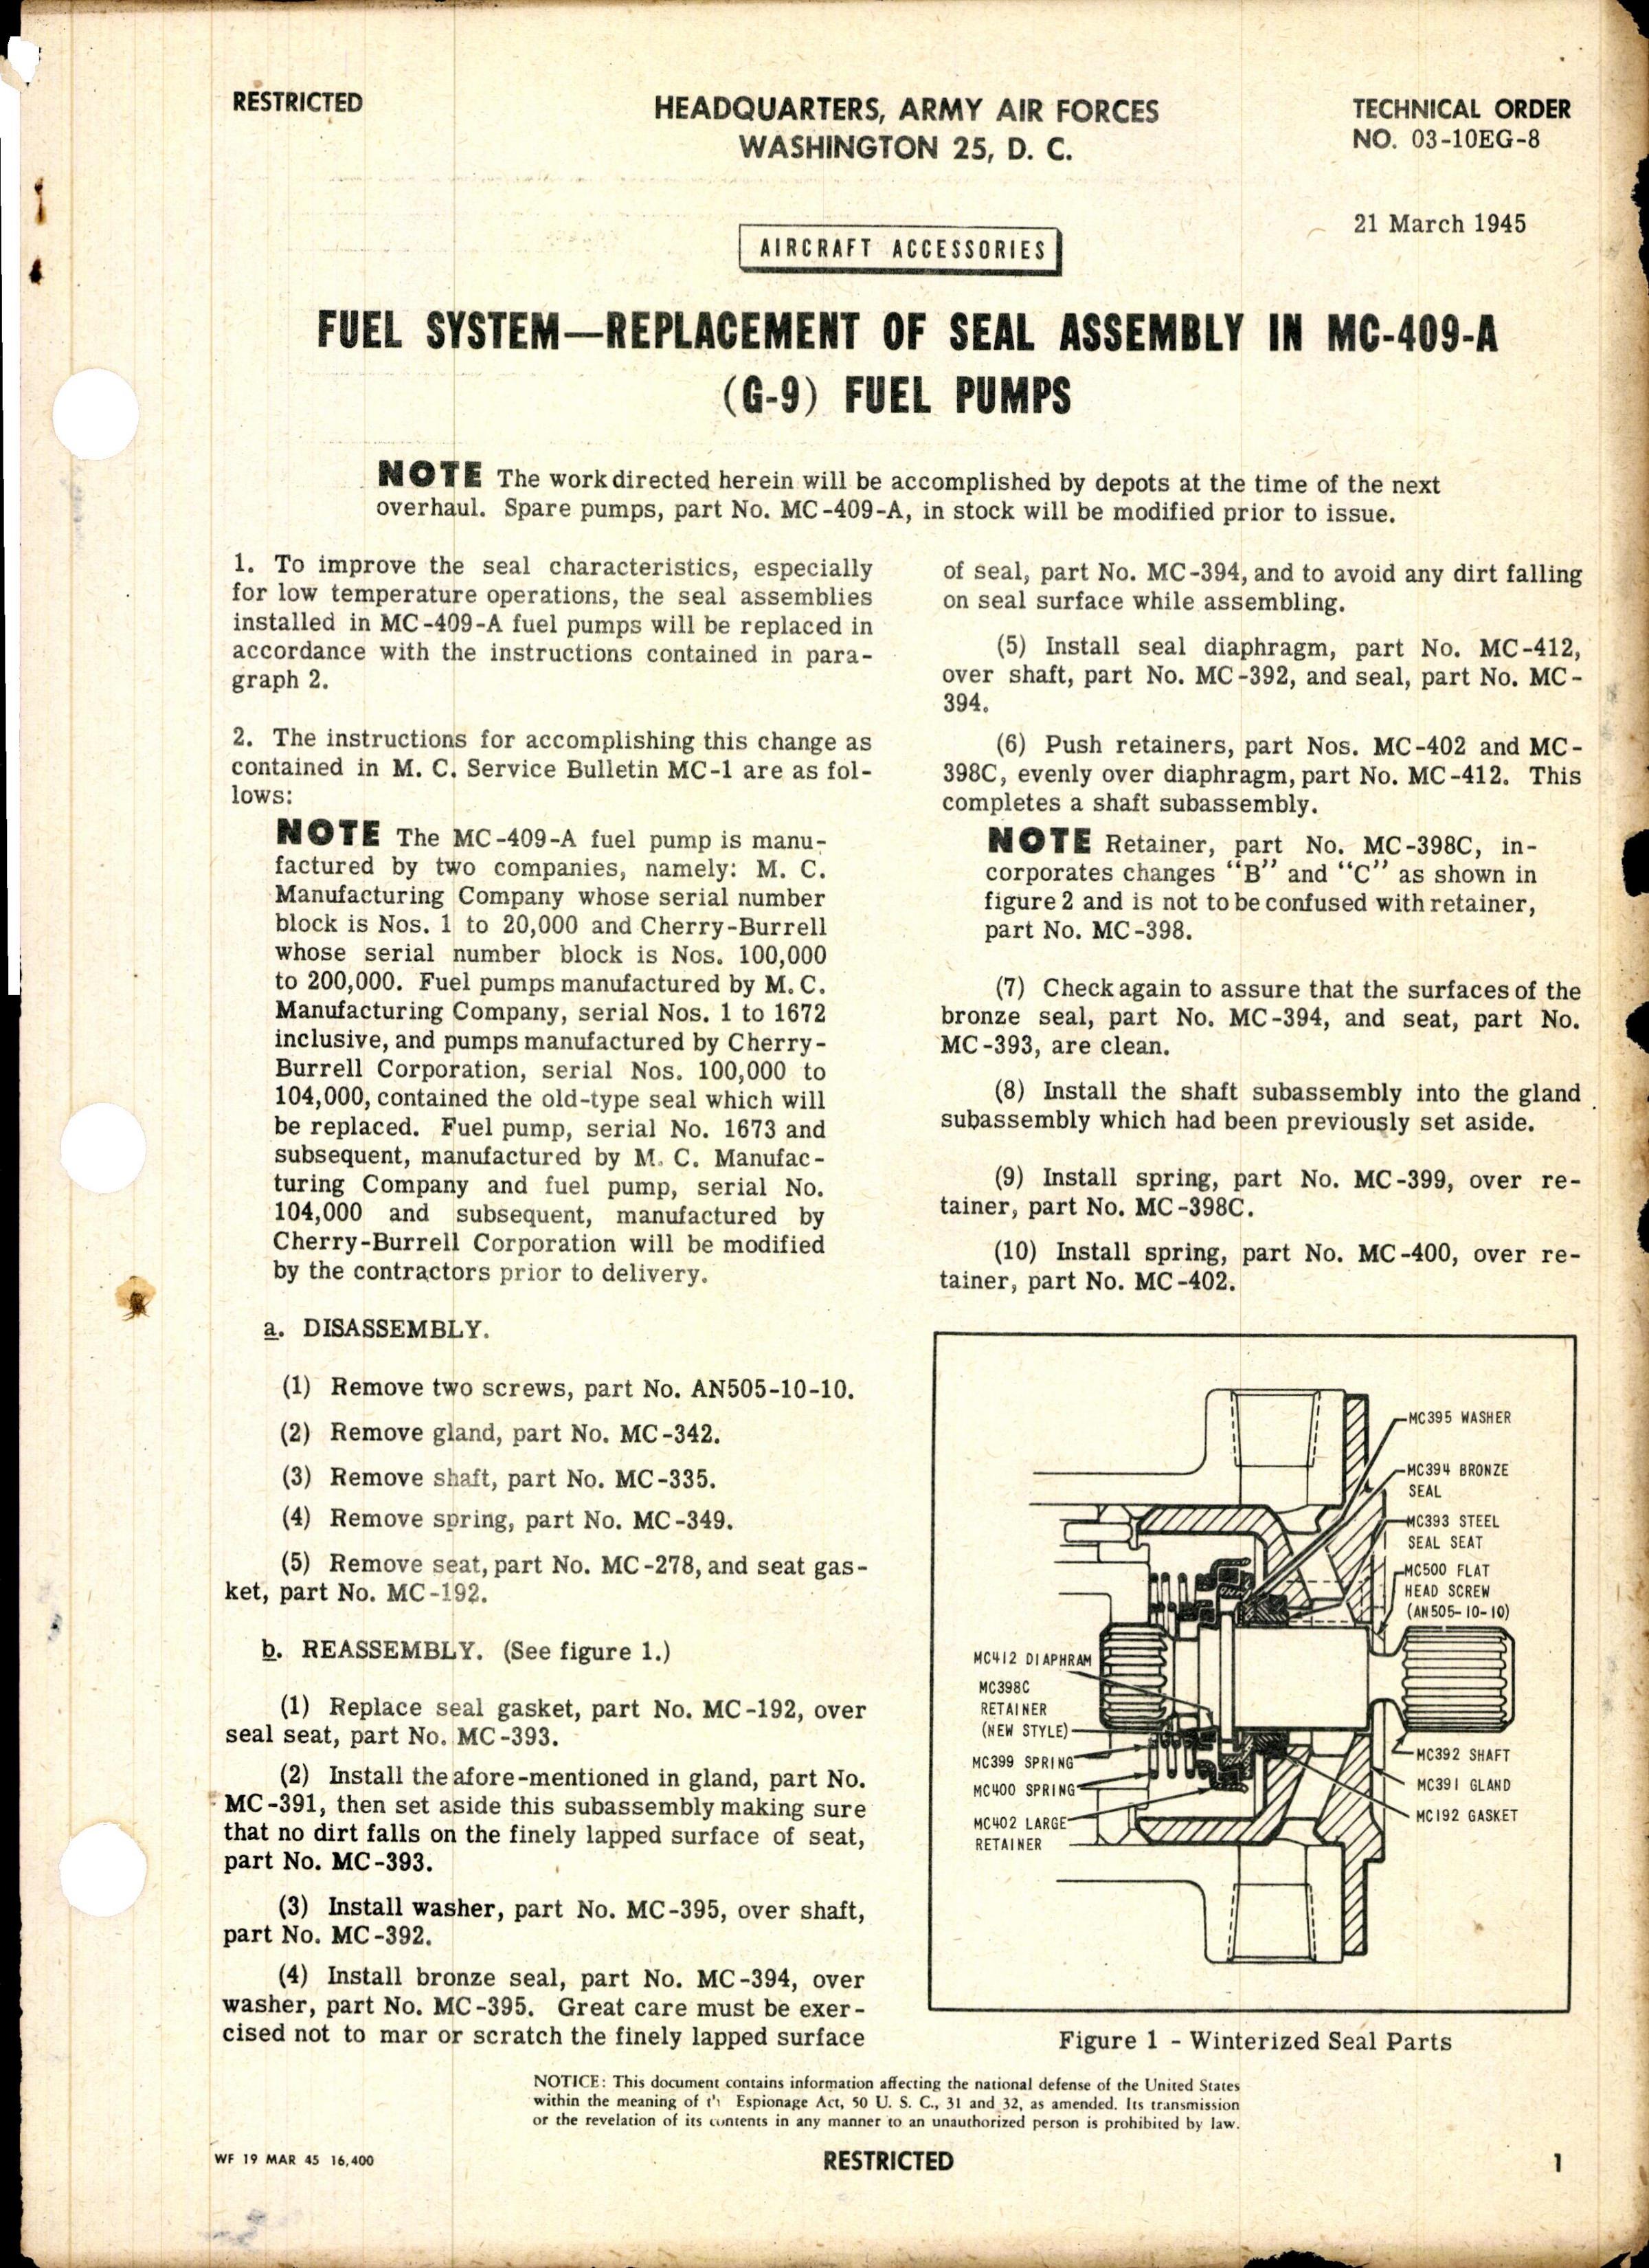 Sample page 1 from AirCorps Library document: Replacement of Seal Assembly in MC-409-A (G-9) Fuel Pumps